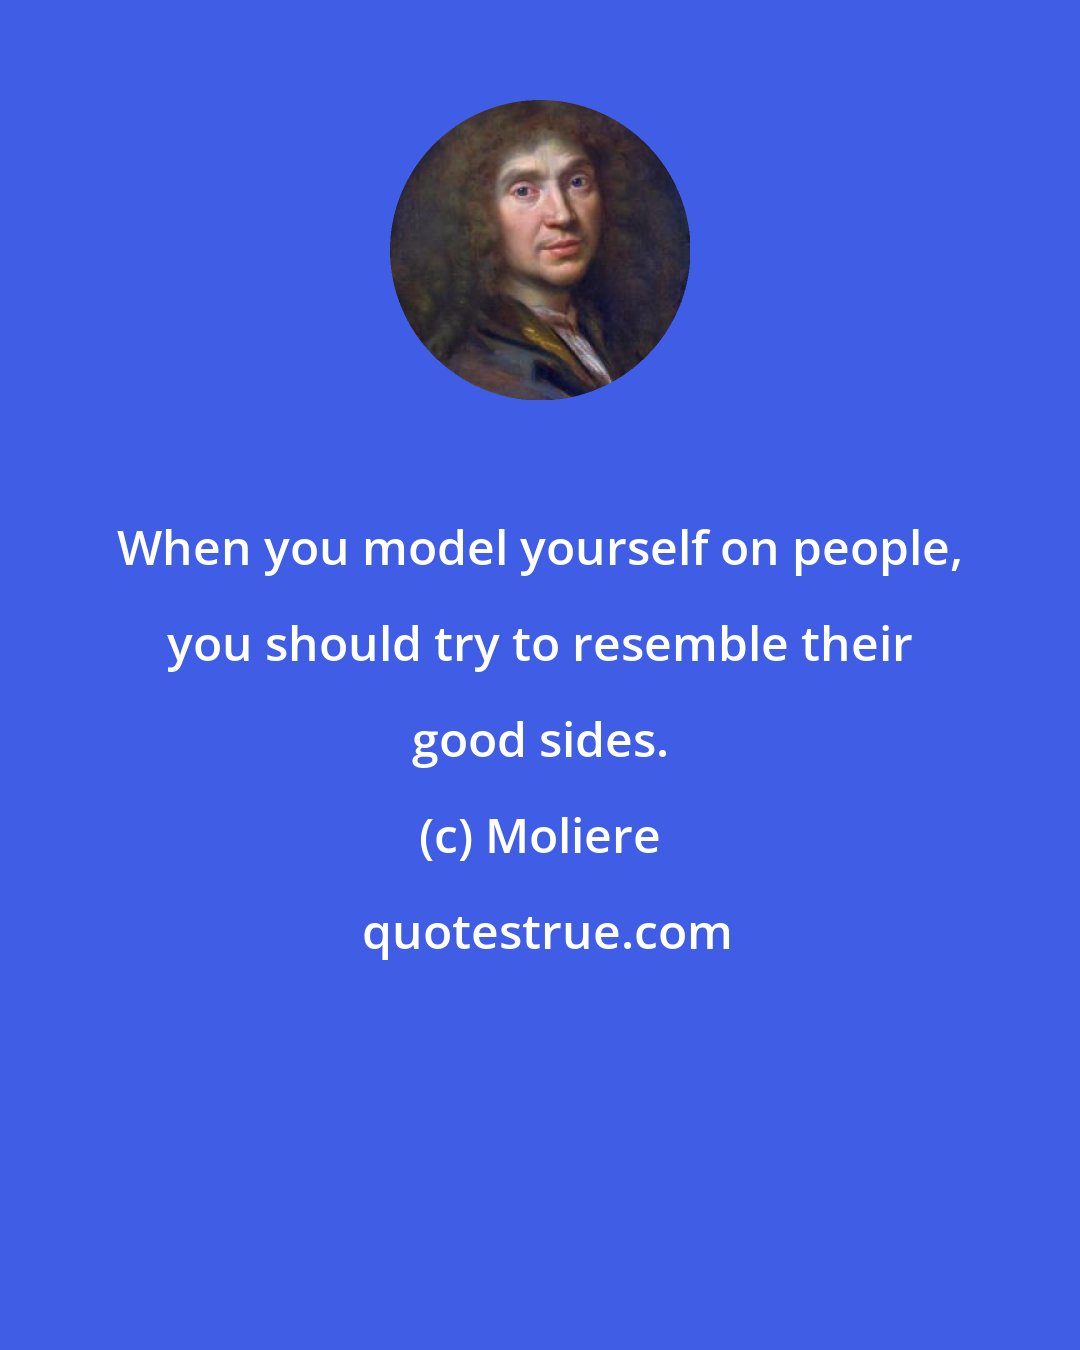 Moliere: When you model yourself on people, you should try to resemble their good sides.